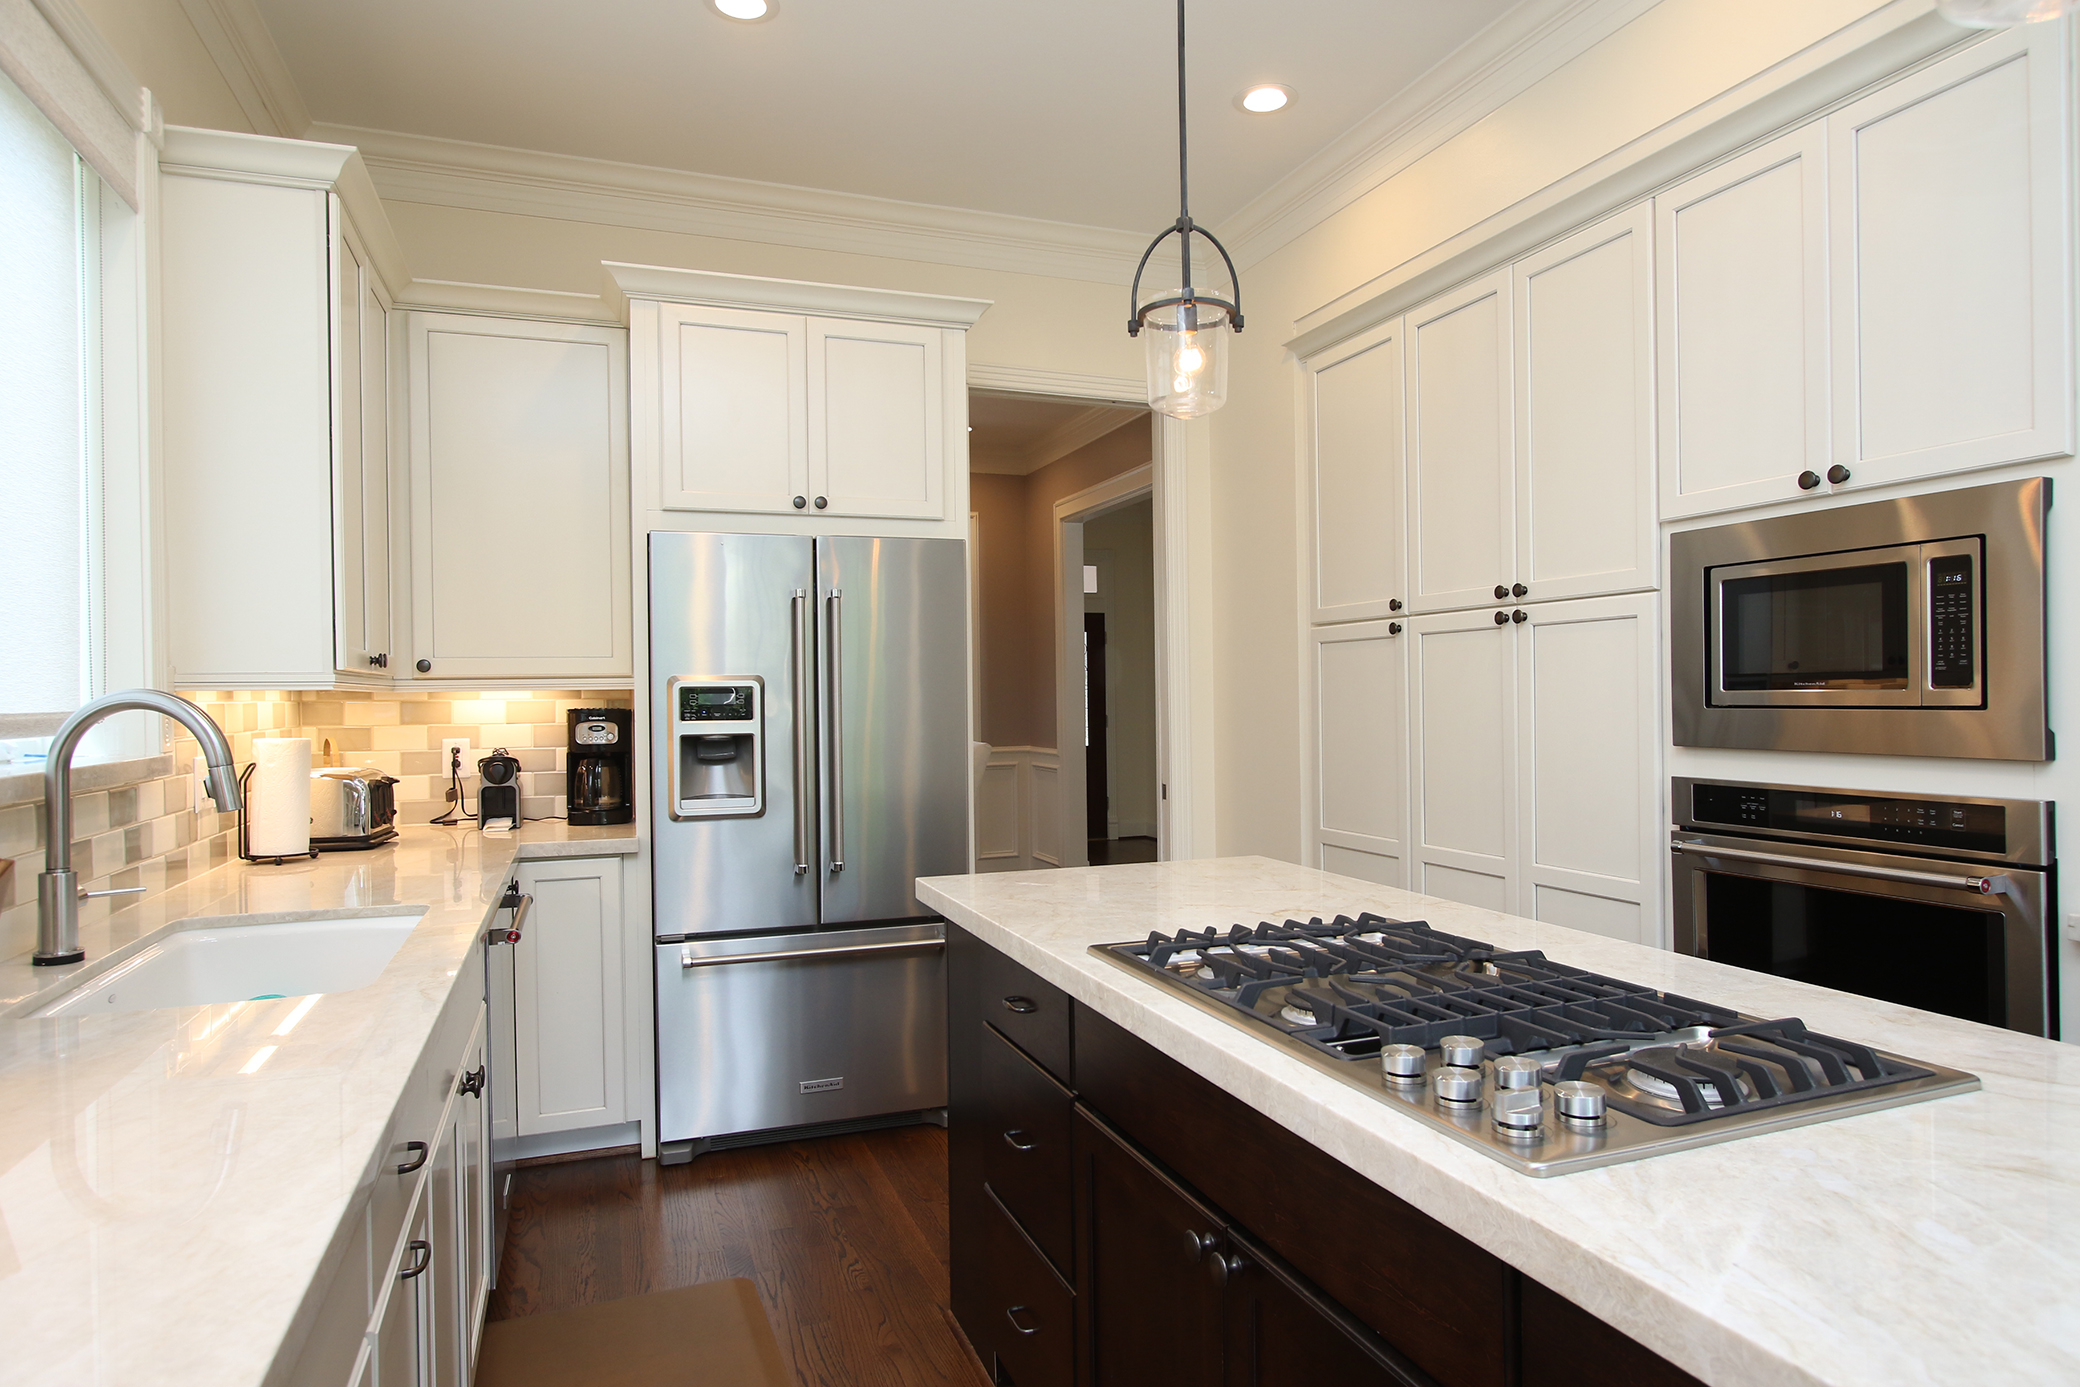 Fundamentals of Great Kitchen Design - Remodelers of Houston